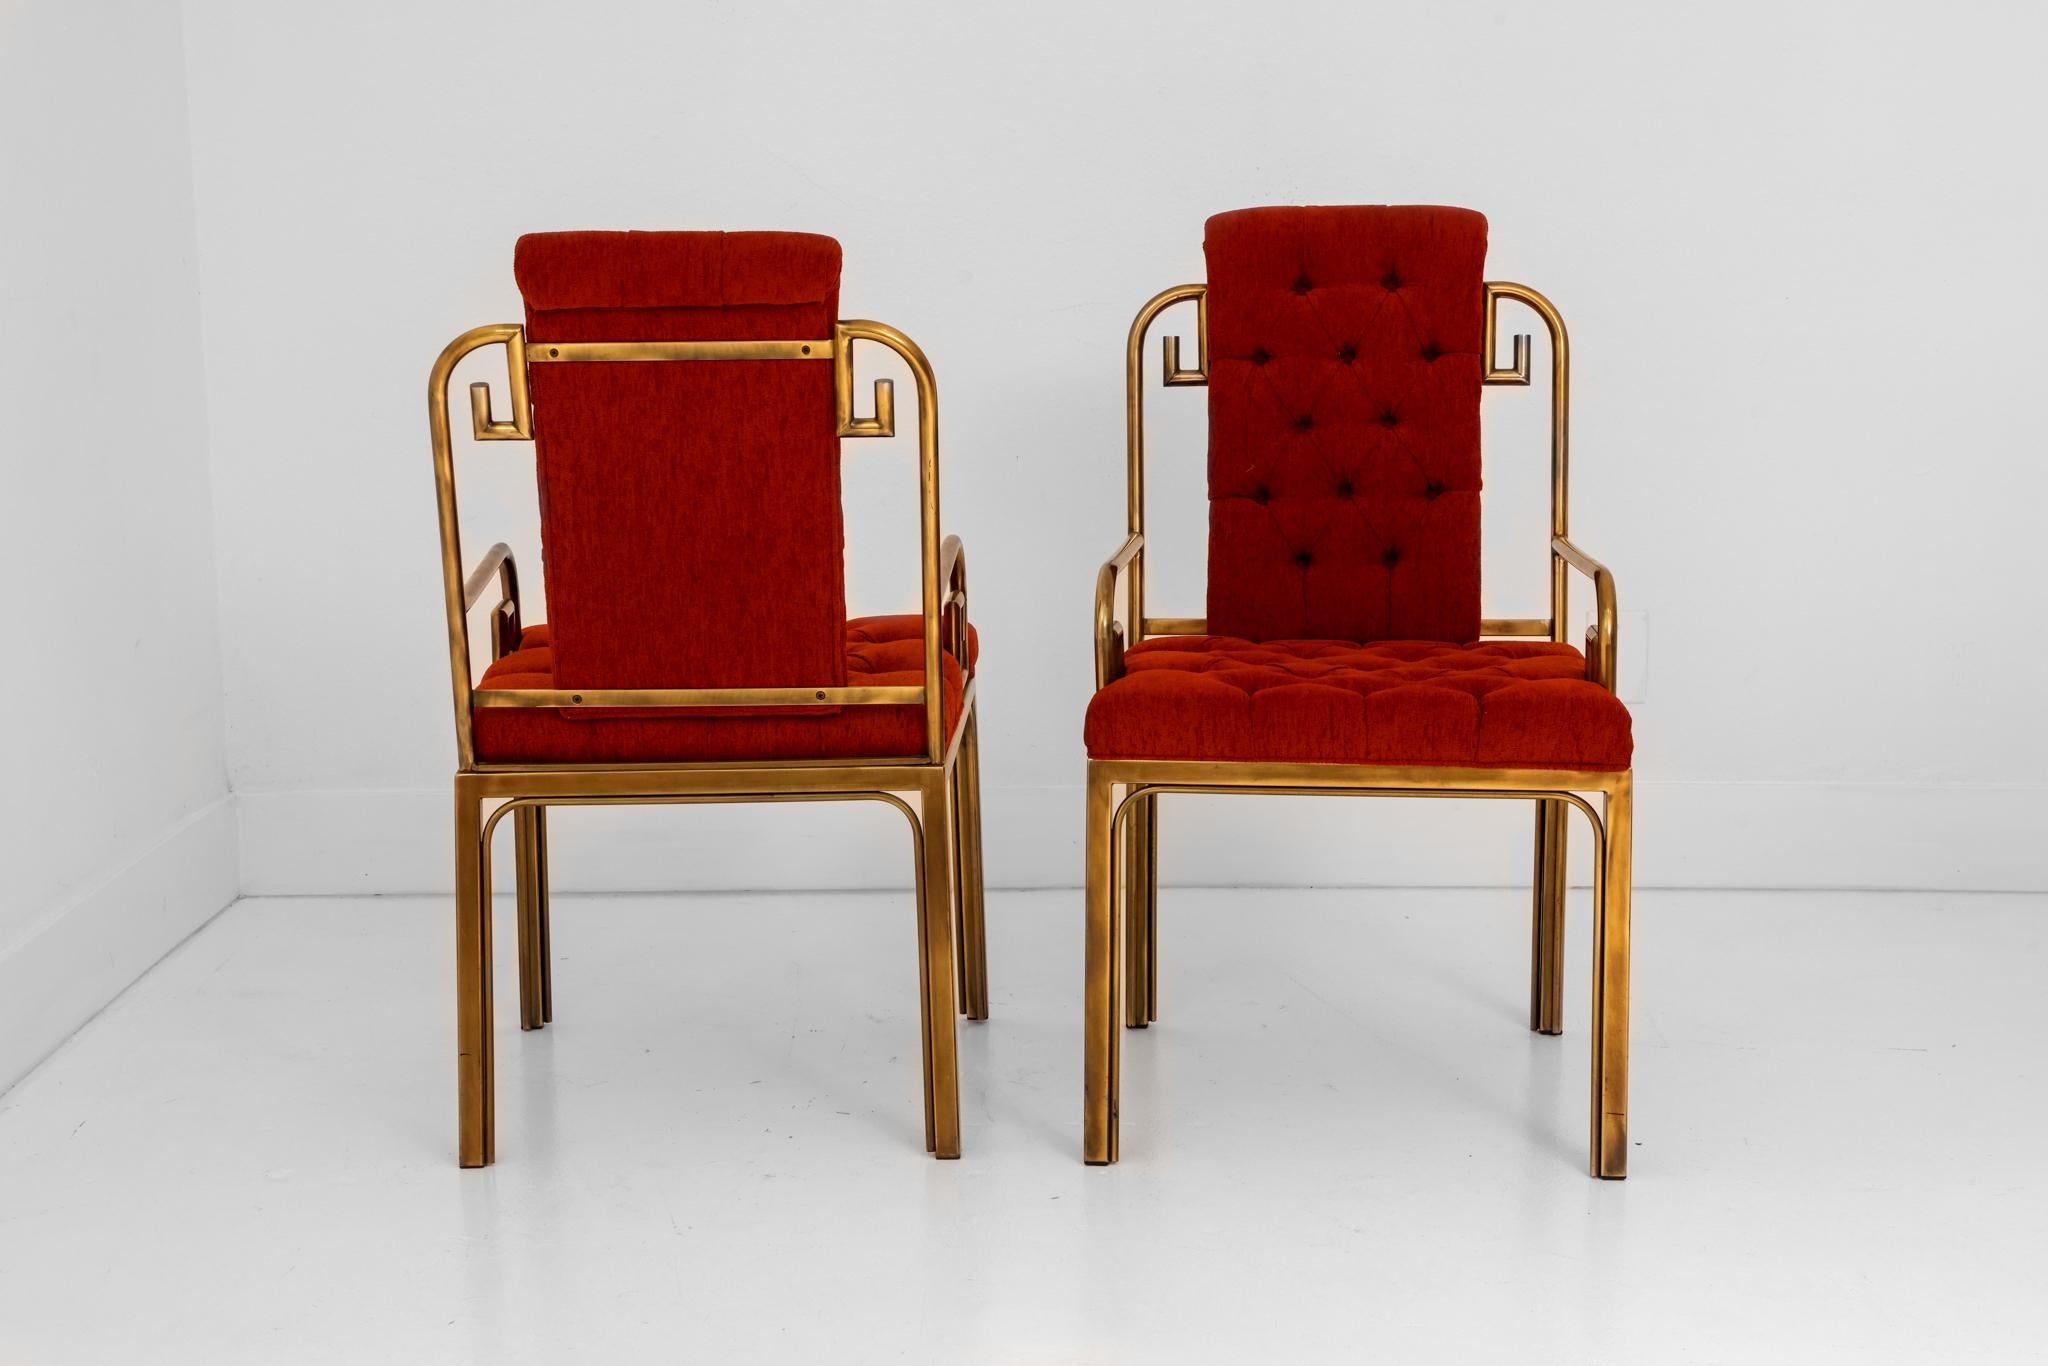 American A Pair of Brass Greek Key Chairs Designed by Bernhard Rohne for Master Craft For Sale